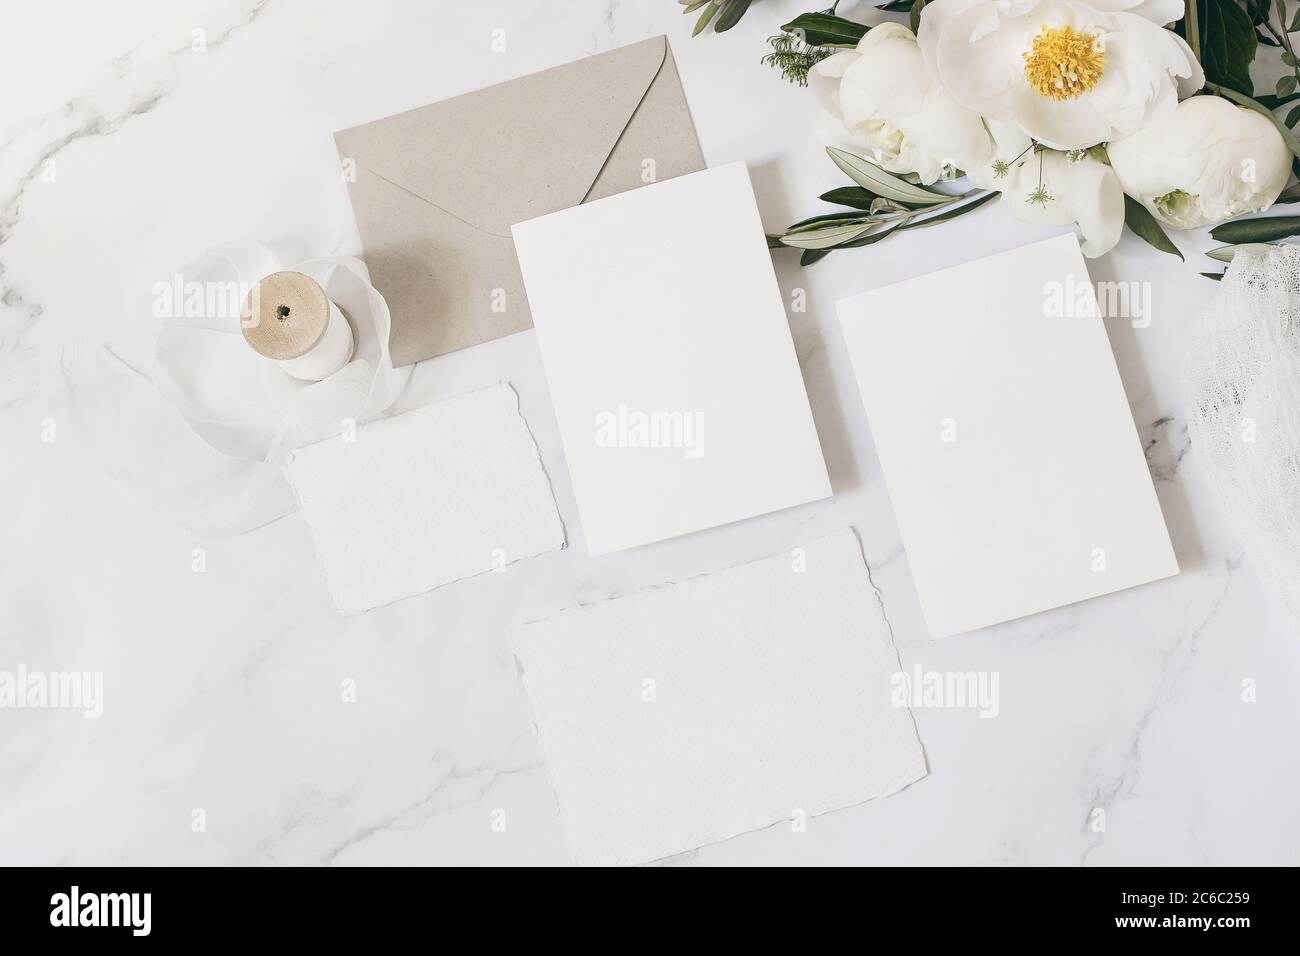 Wedding stationery, still life composition. Greeting cards mockup scene. Bouquet of white peony flowers, olive branches, cow parsley on marble table Stock Photo